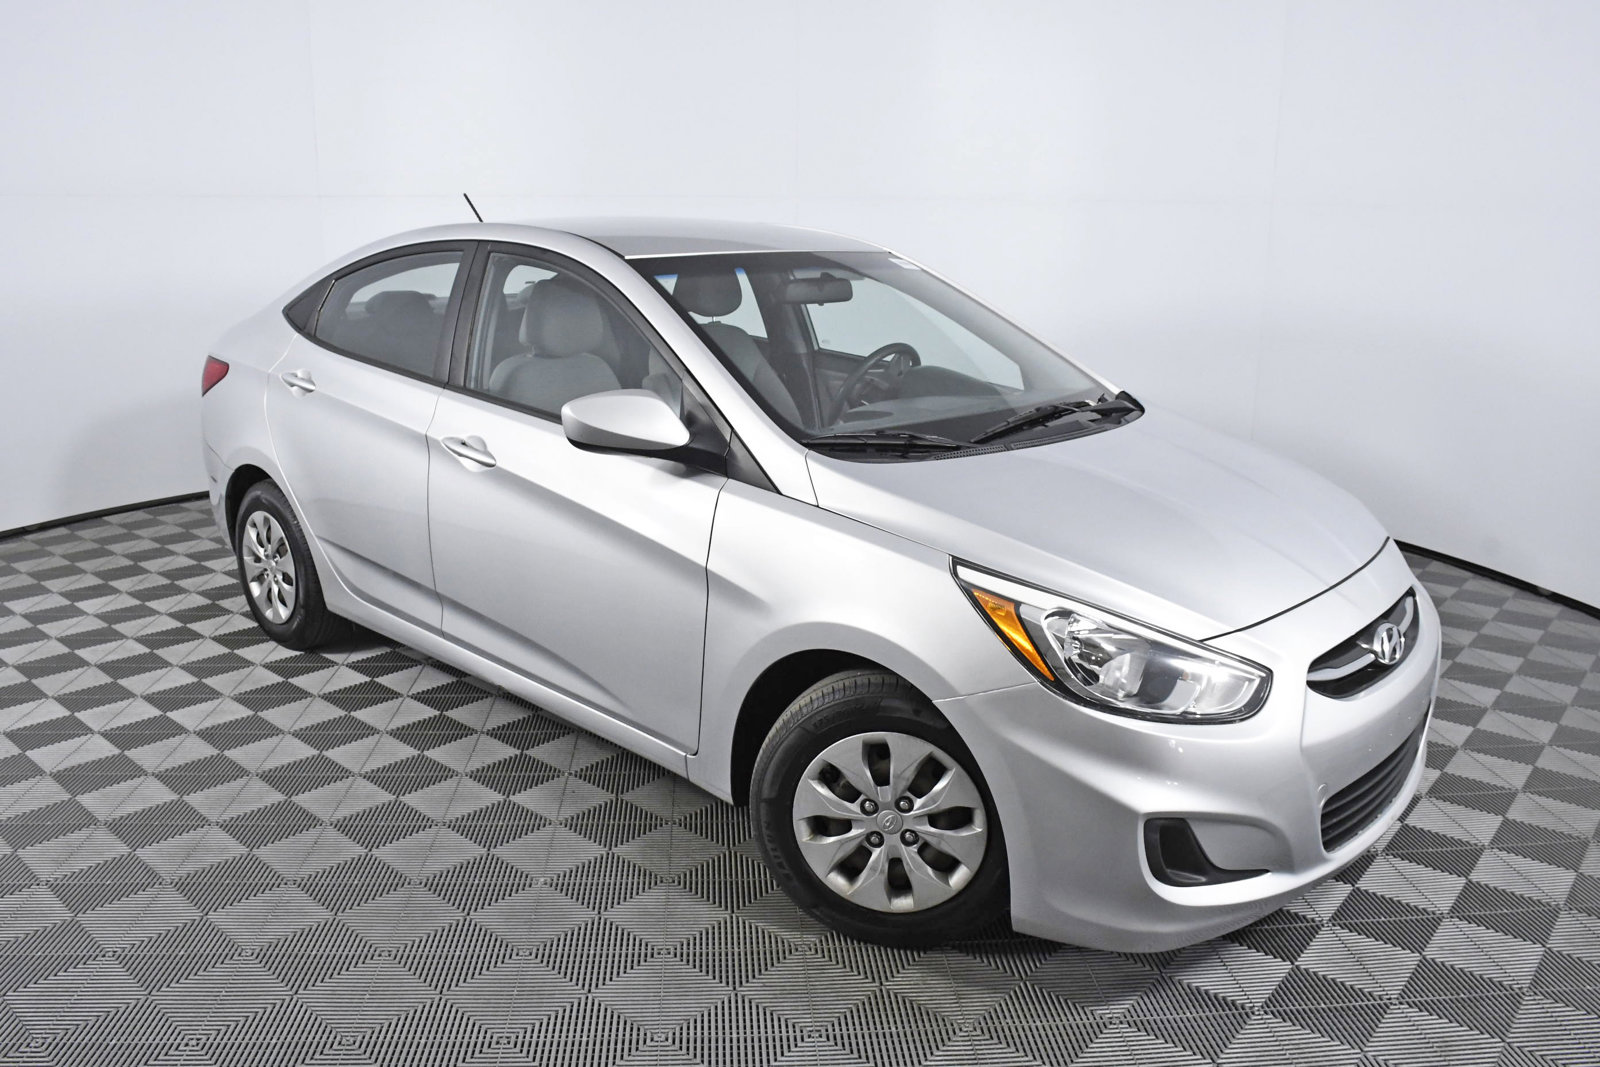 Pre-Owned 2016 Hyundai Accent SE 4dr Car in Palmetto Bay #U016479 | HGreg  Nissan Kendall